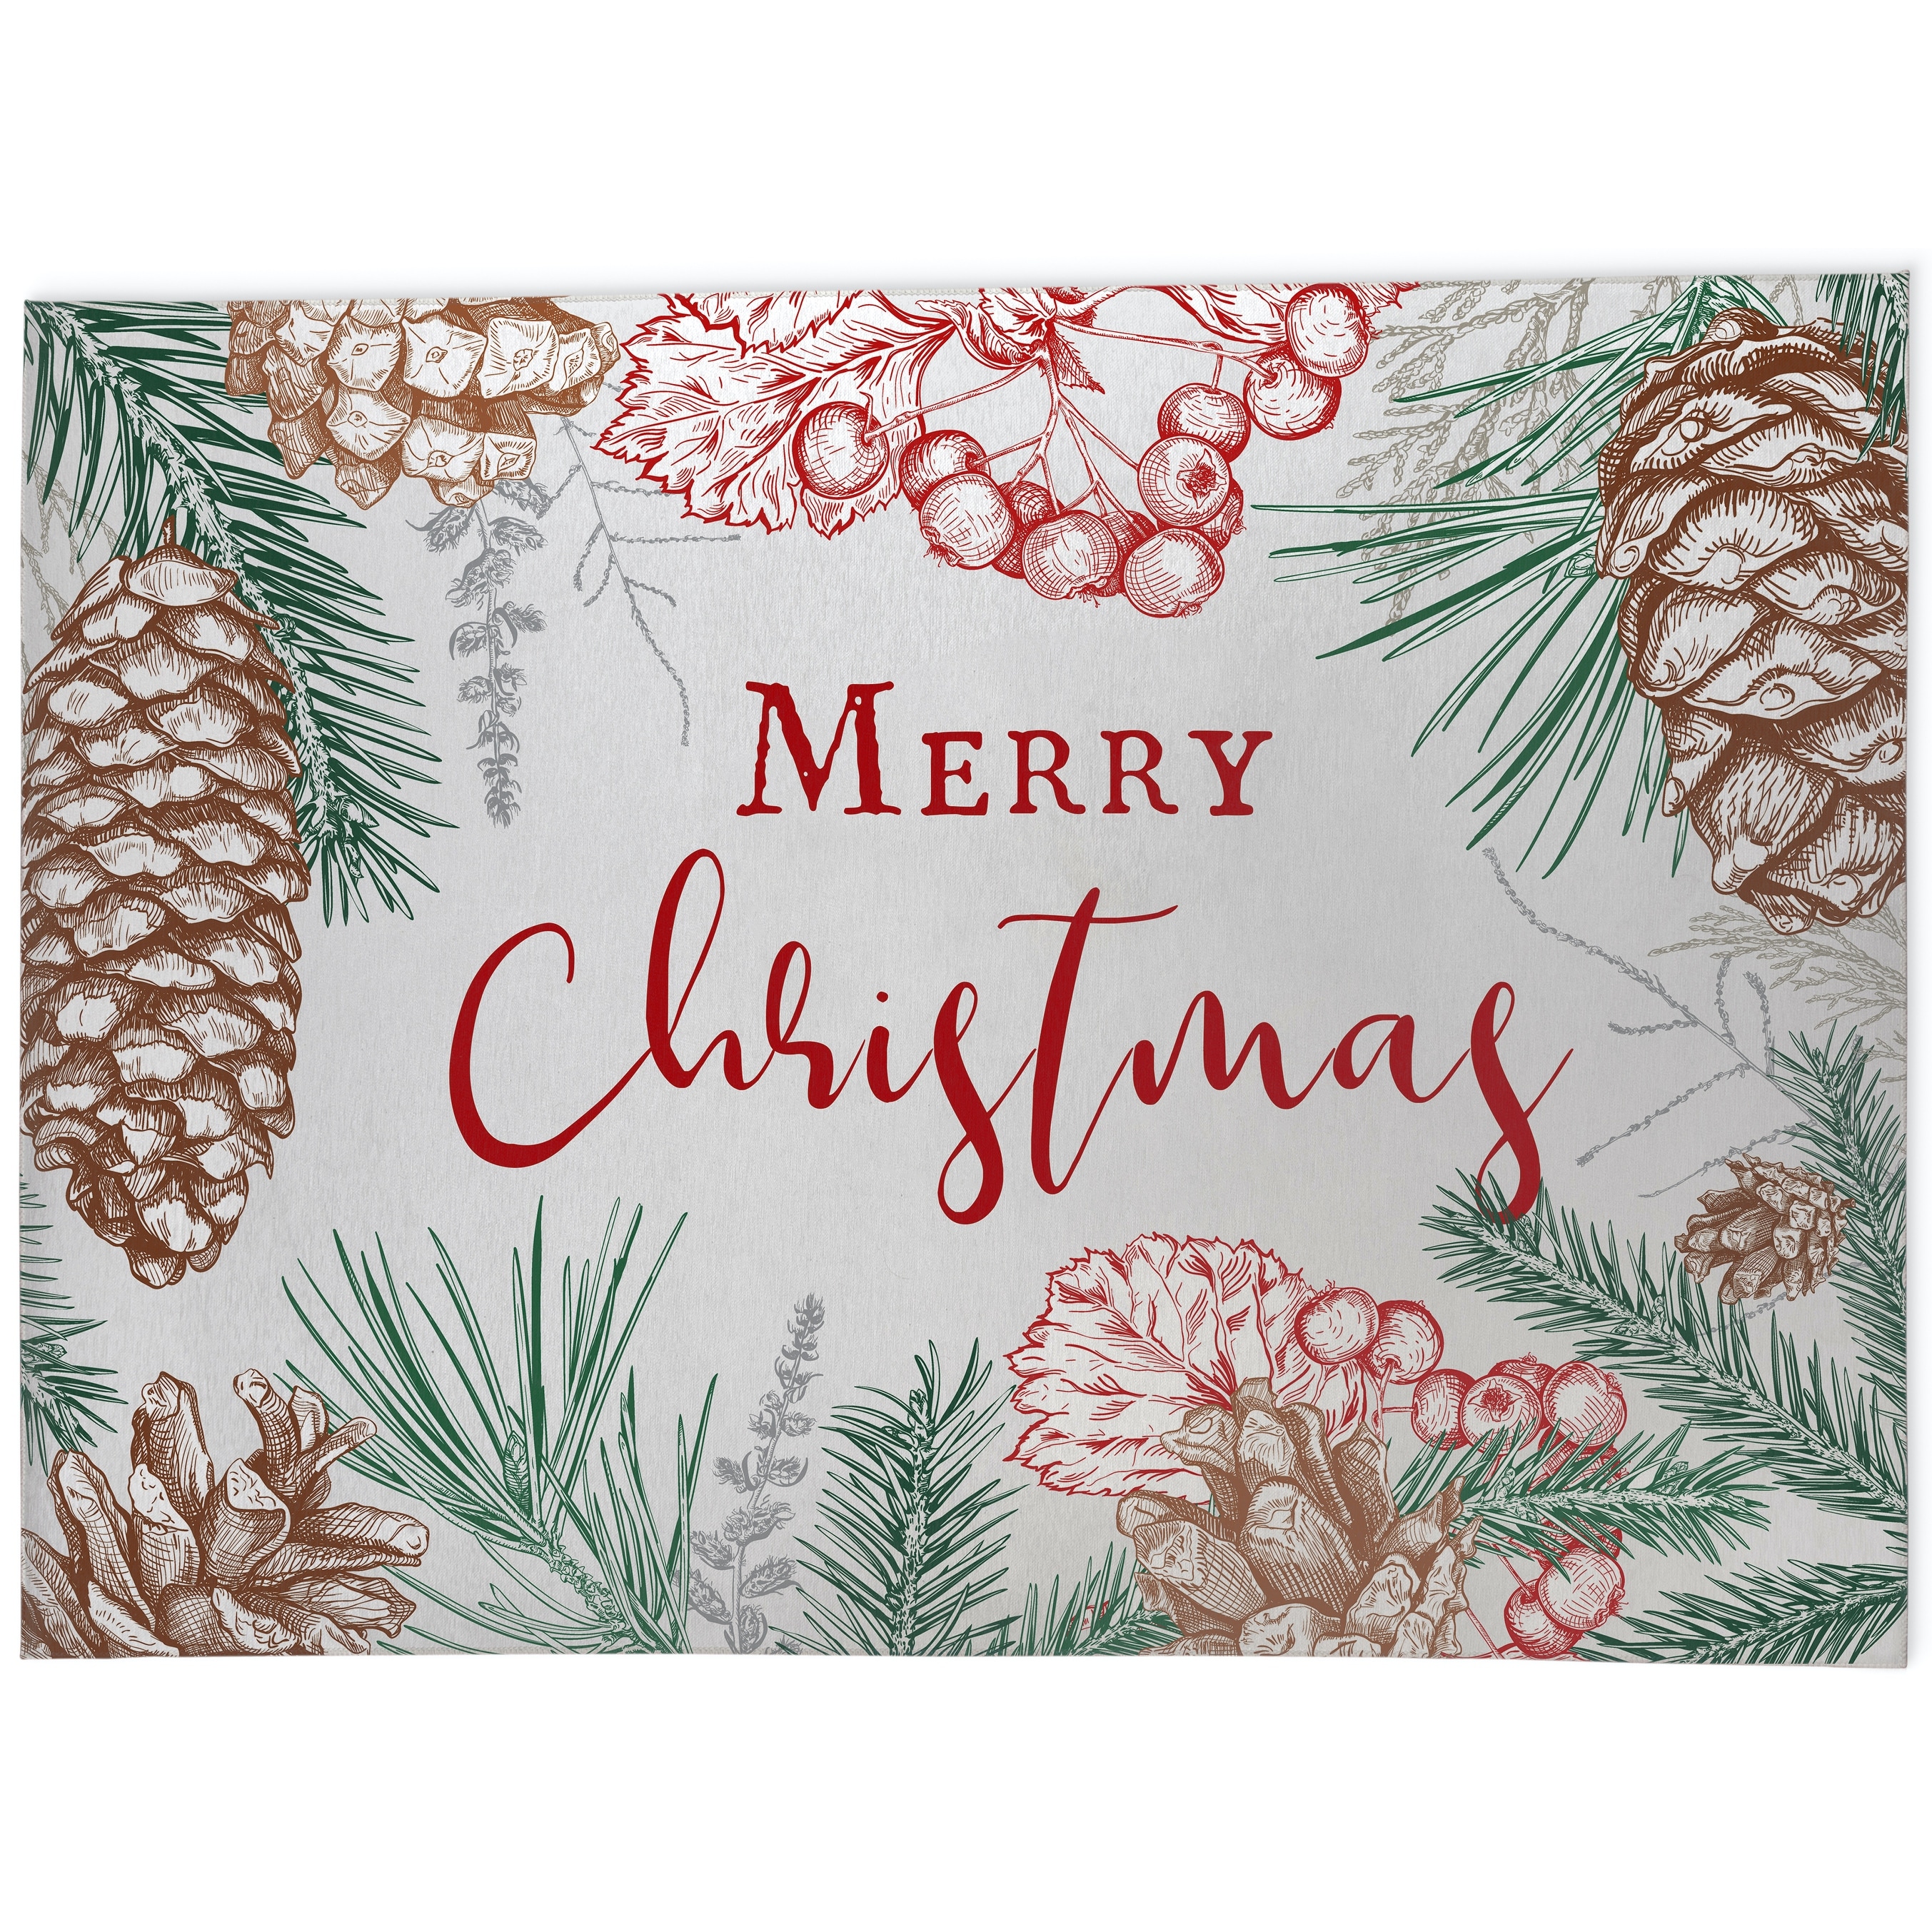 https://ak1.ostkcdn.com/images/products/is/images/direct/a7207e9d03f6400f61c28f99668ca967f06974a9/MERRY-CHRISTMAS-NATURE-Indoor-Floor-Mat-By-Kavka-Designs.jpg